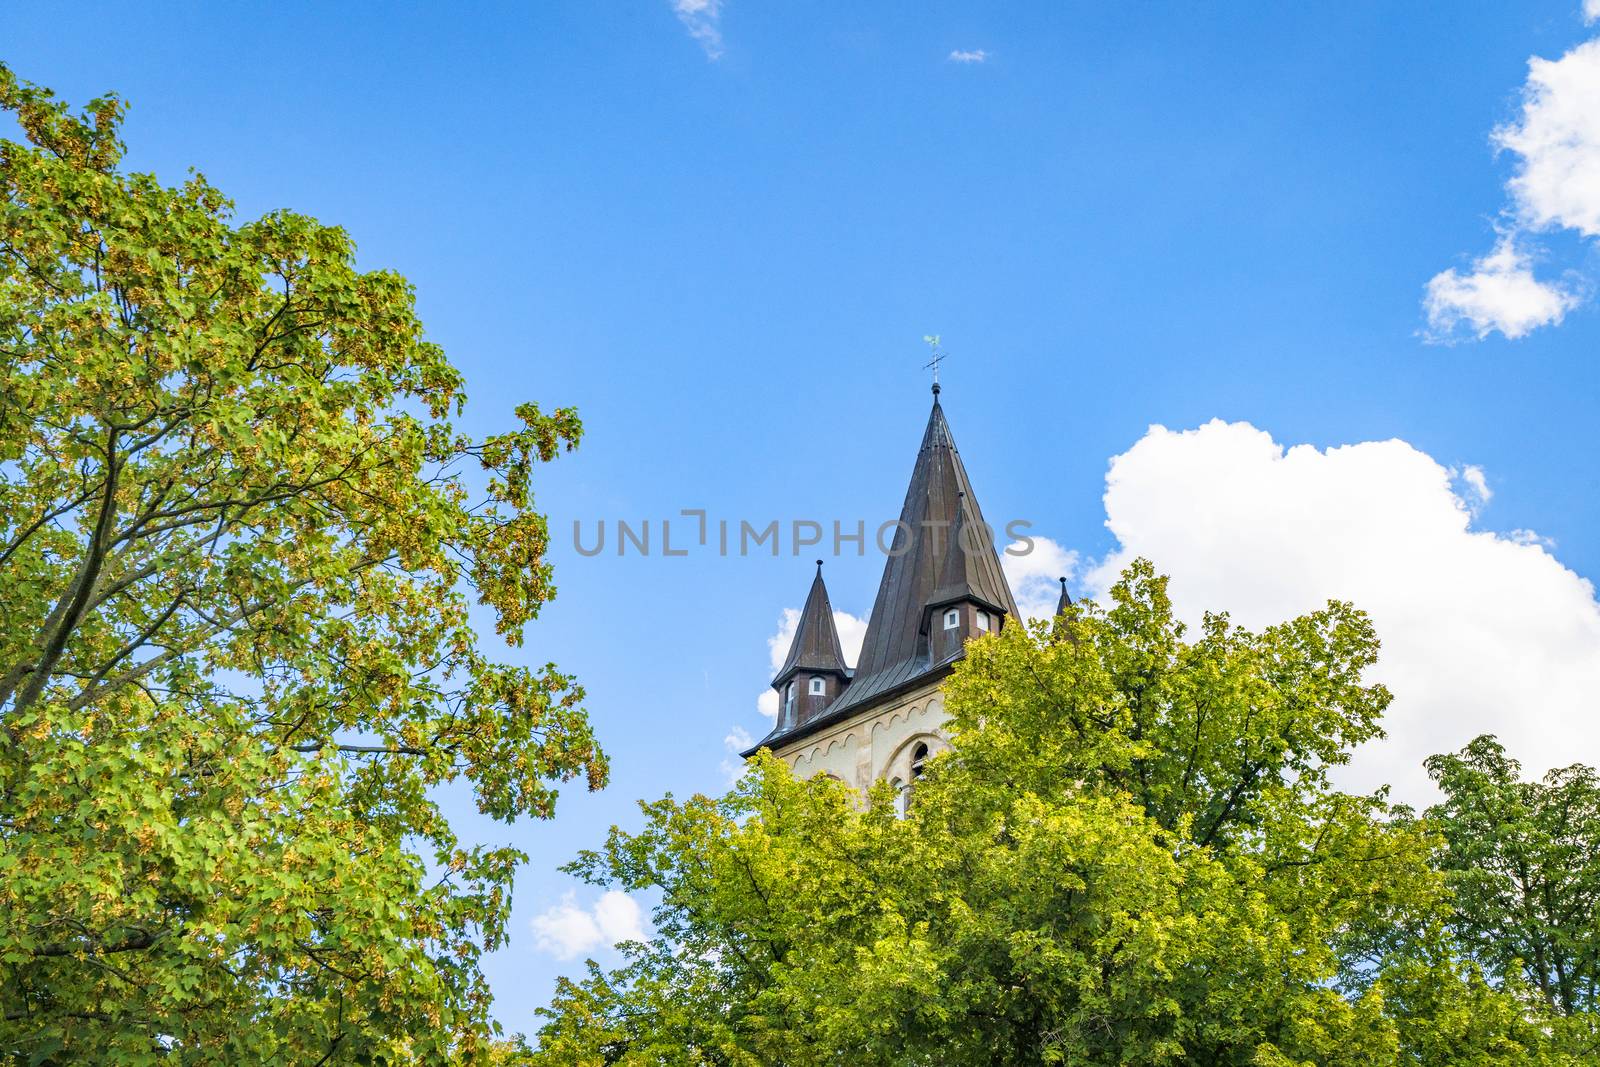 Fairytale castle tower rising up behind green trees in the spring with blue sky above